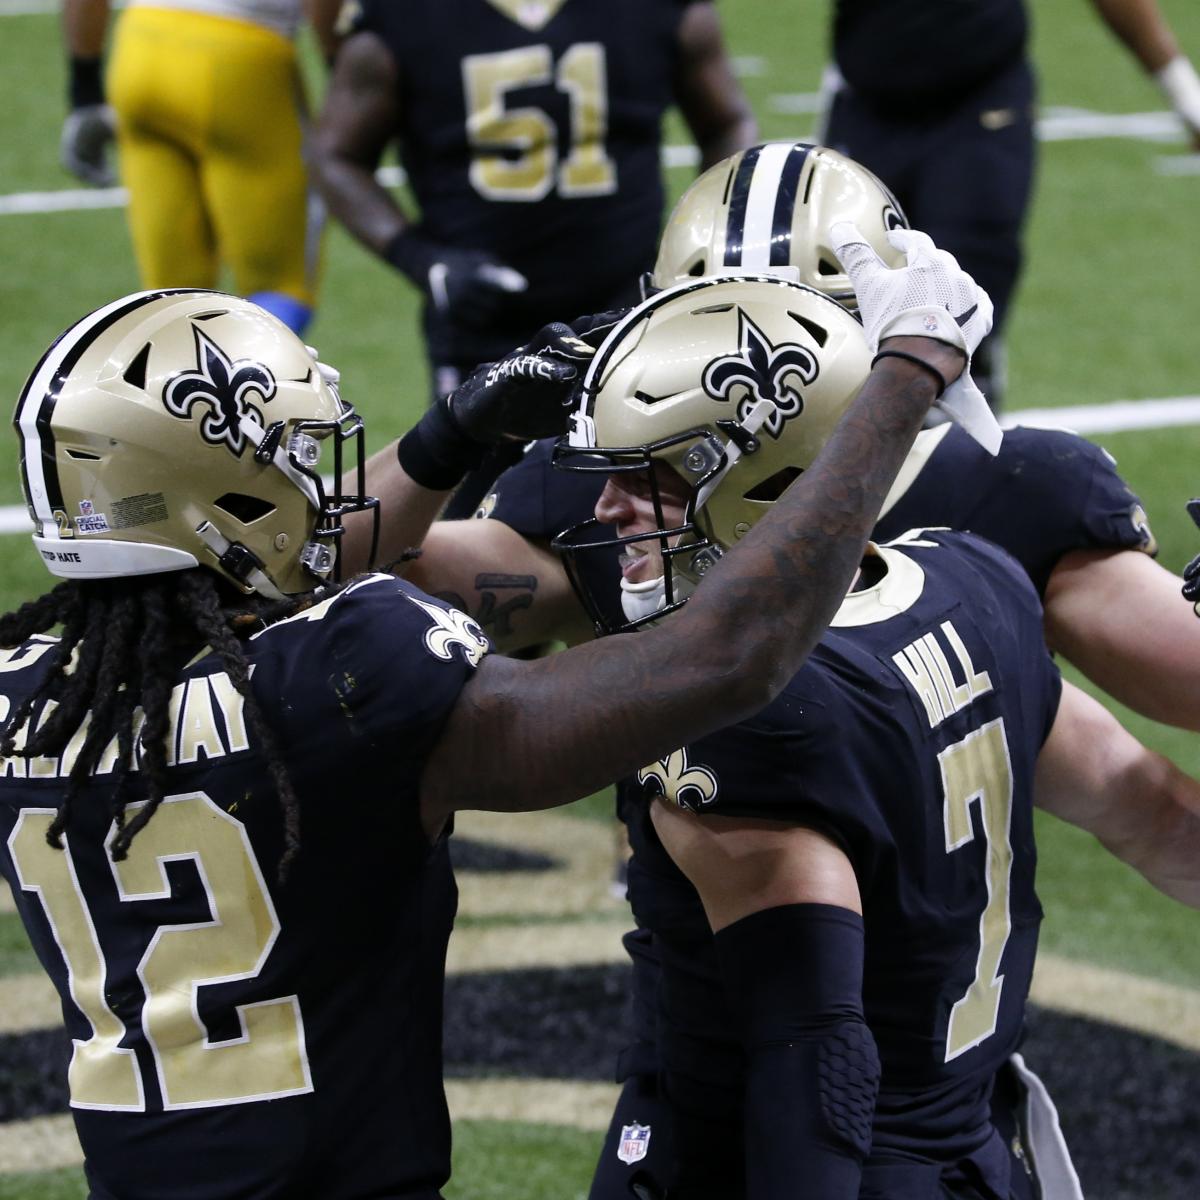 Bettor Wins $446K on $1.487M Wager After Saints Rally to Defeat Chargers